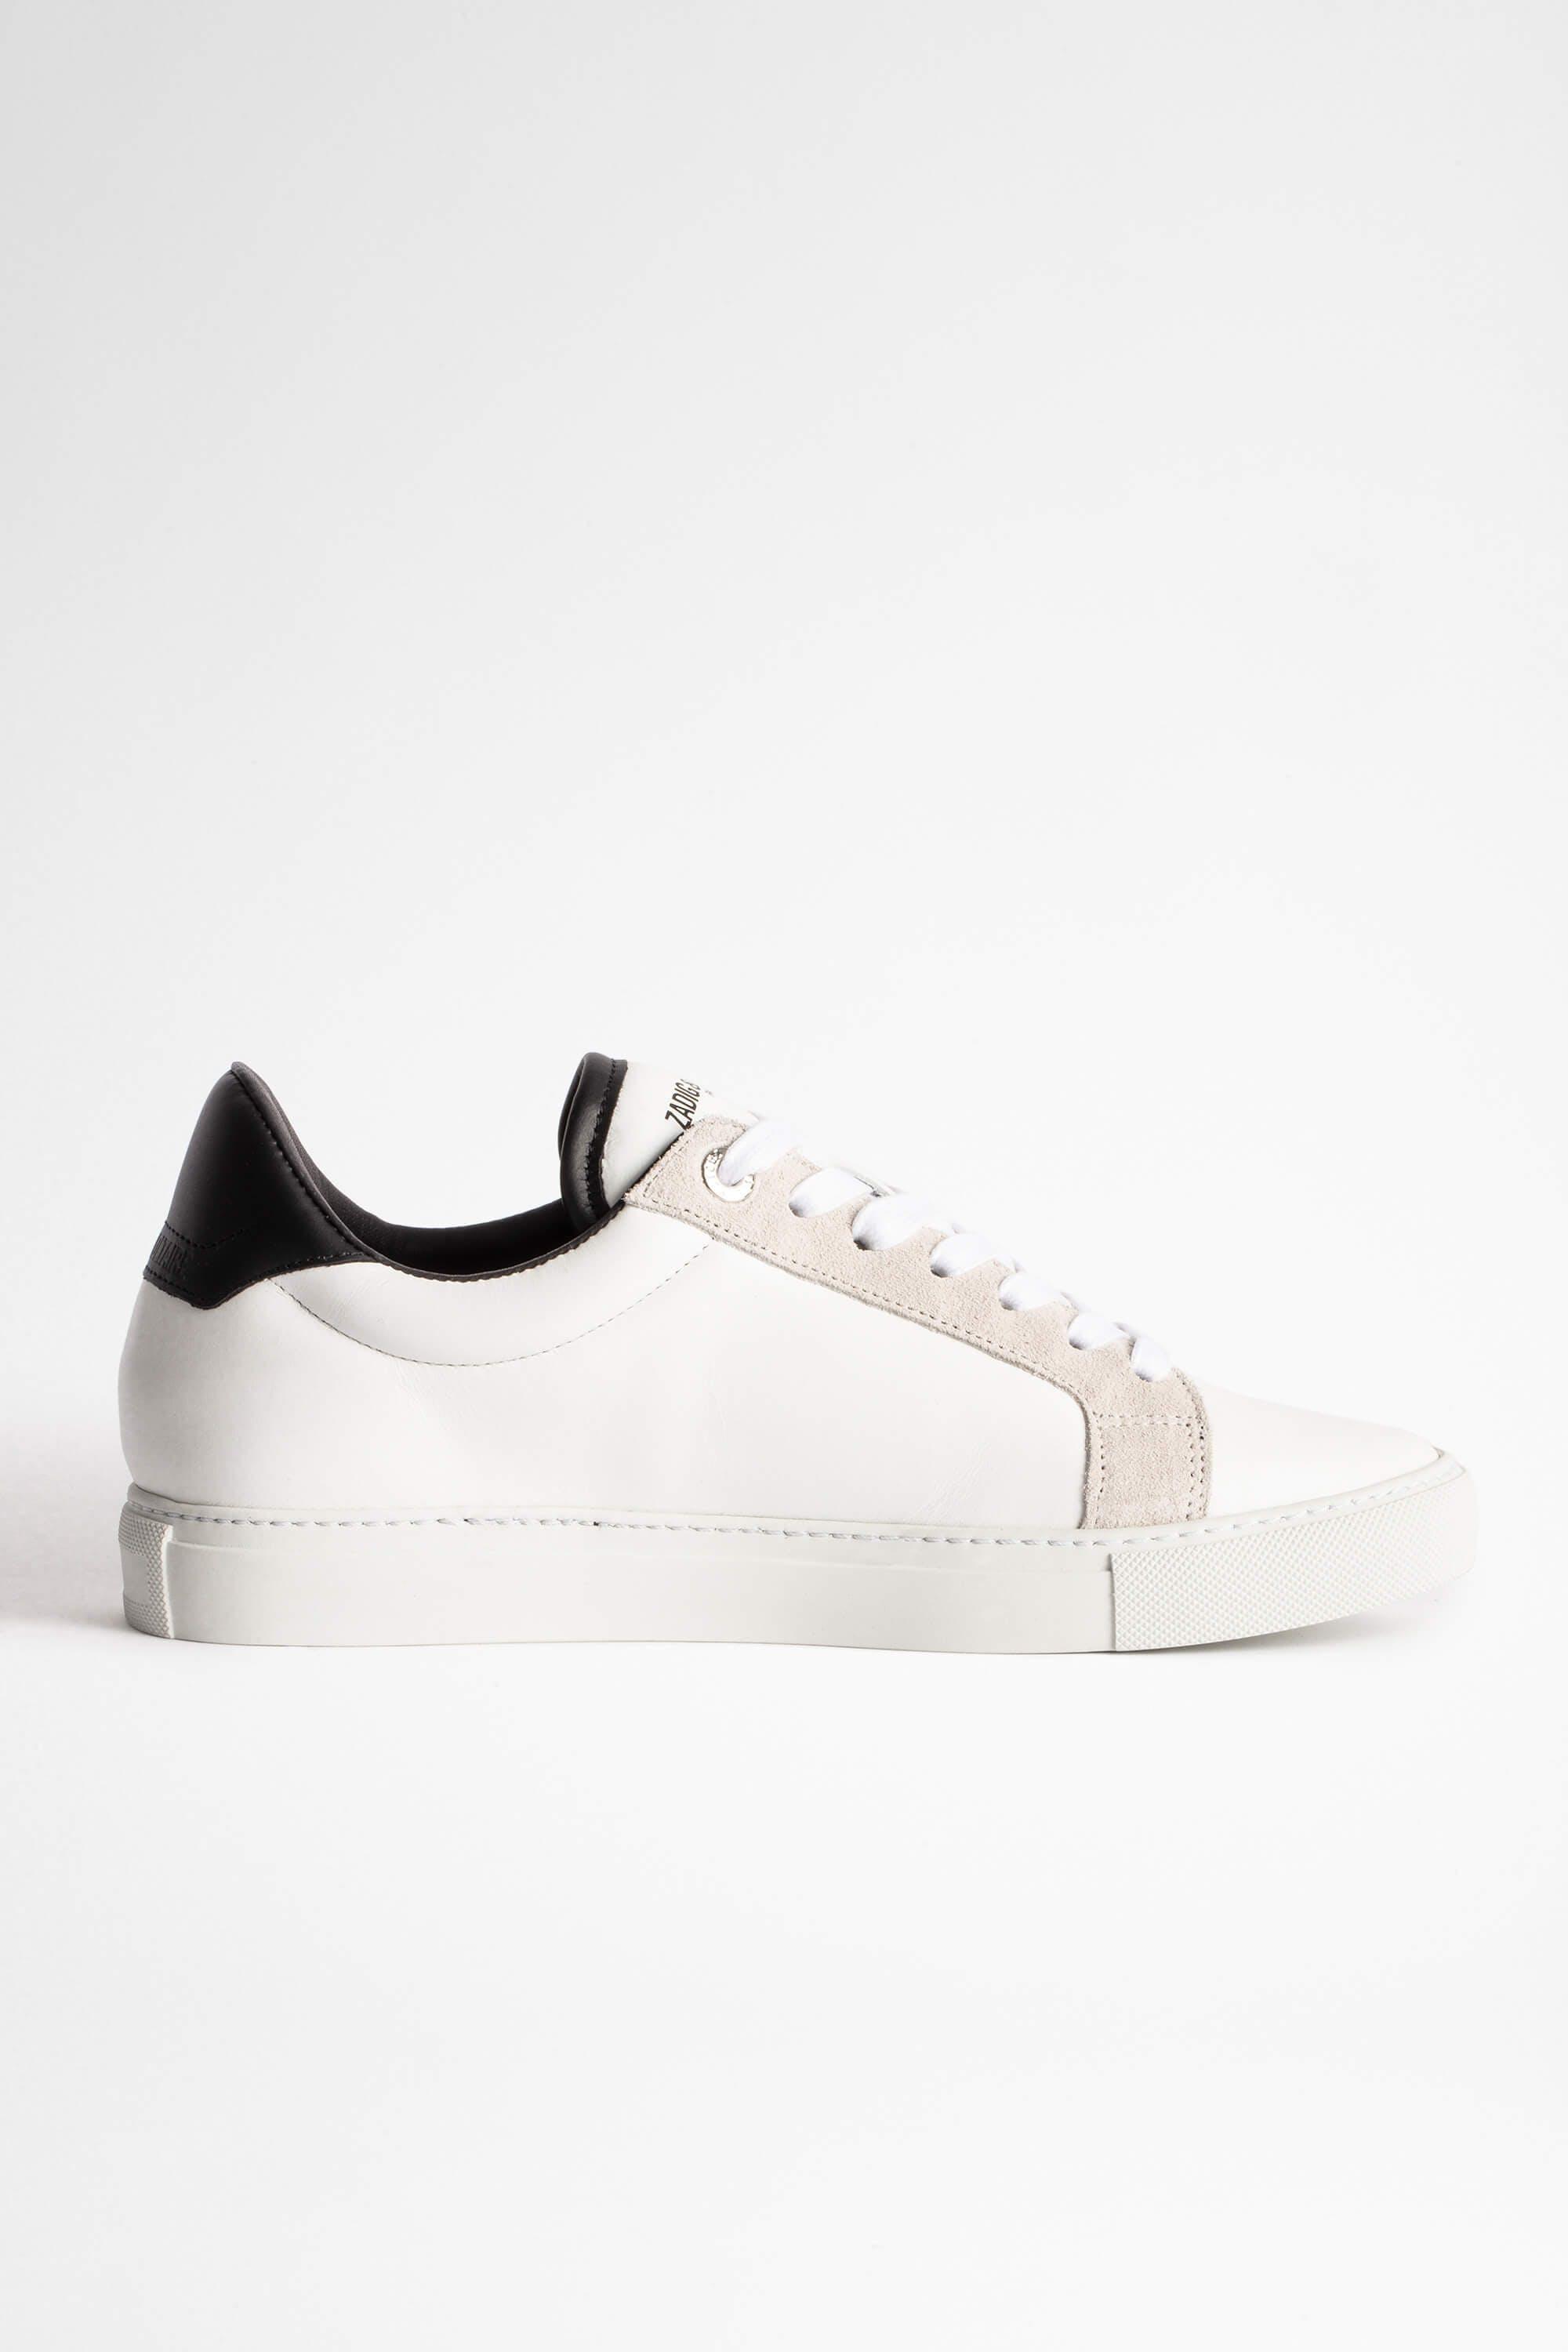 Zadig & Voltaire Zv1747 Heart Patch Sneakers in White | Lyst